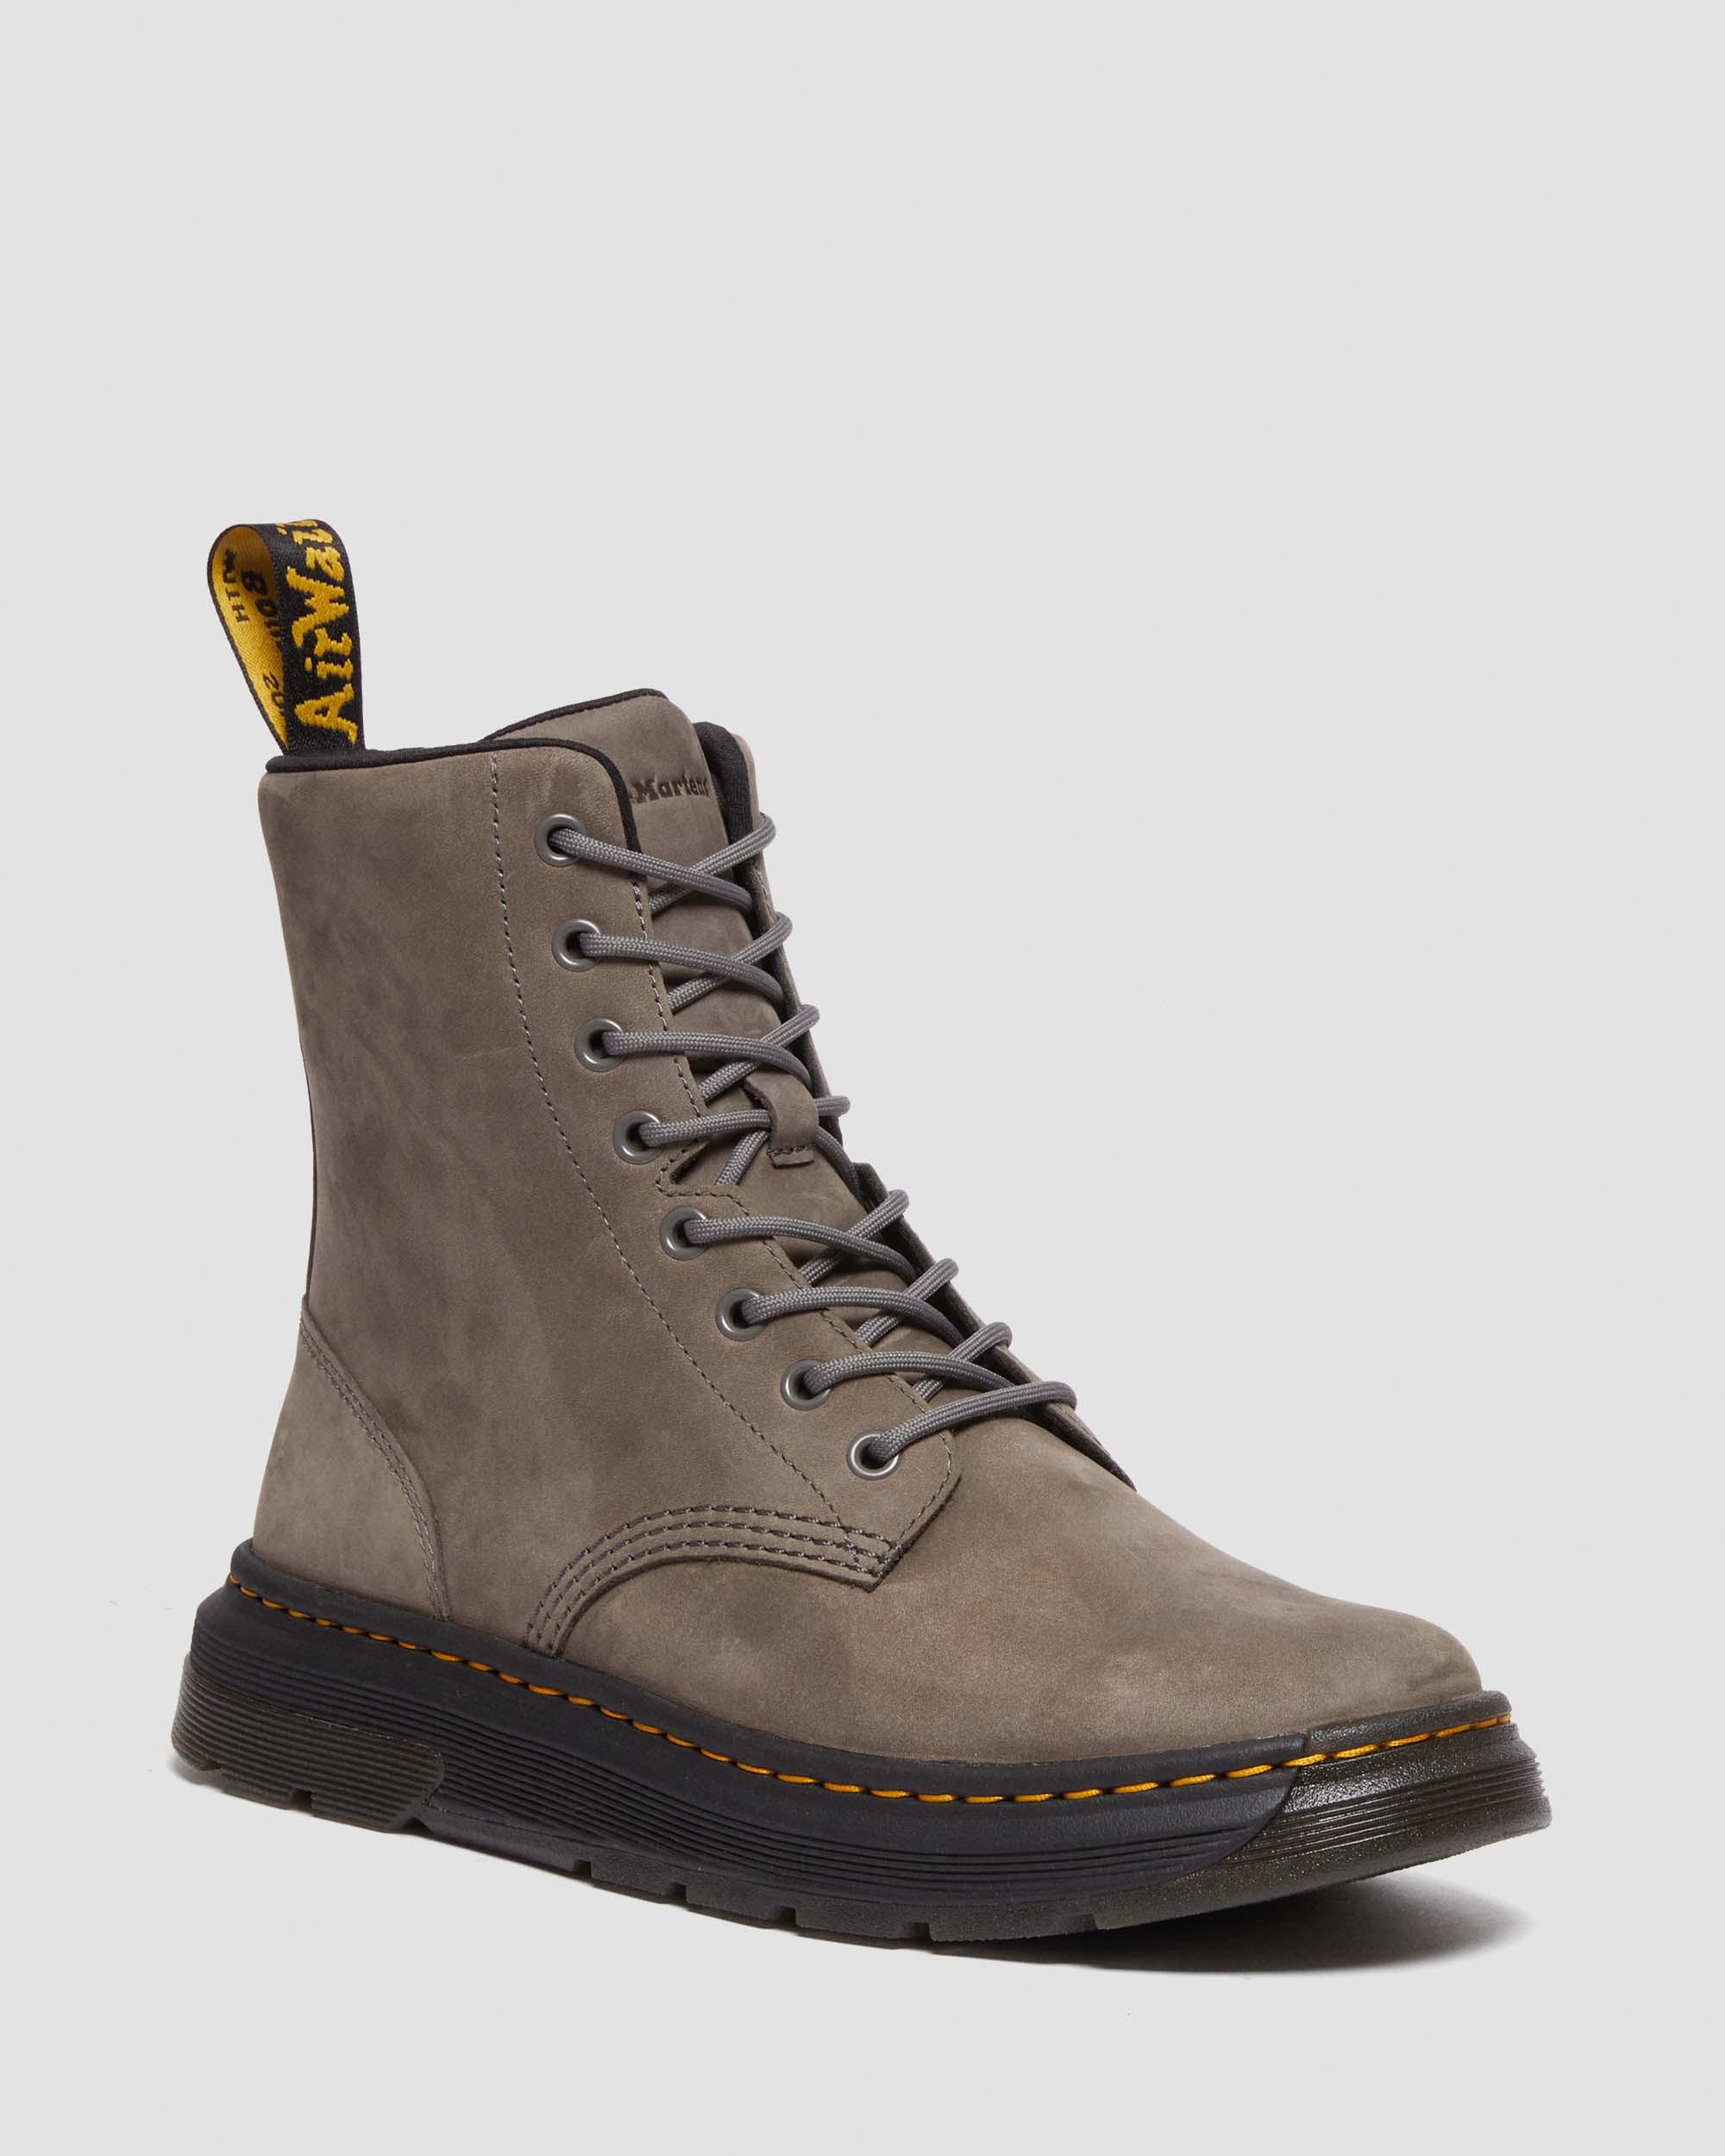 Crewson Leather Lace Up BootsCrewson Leather Lace Up Boots Dr. Martens